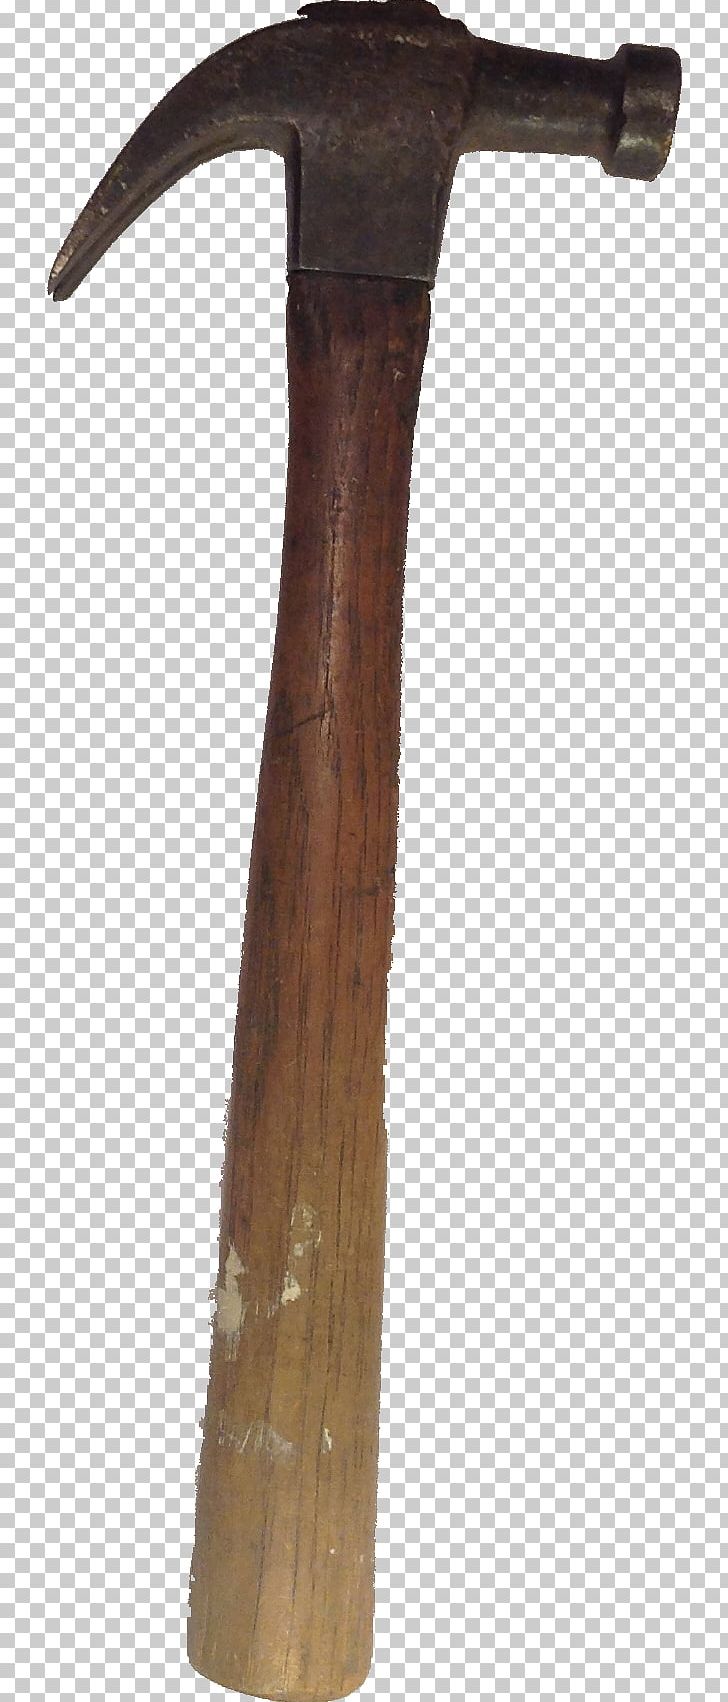 Pickaxe Splitting Maul Antique Tool Hammer PNG, Clipart, Antique, Antique Tool, Hammer, Pickaxe, Splitting Maul Free PNG Download